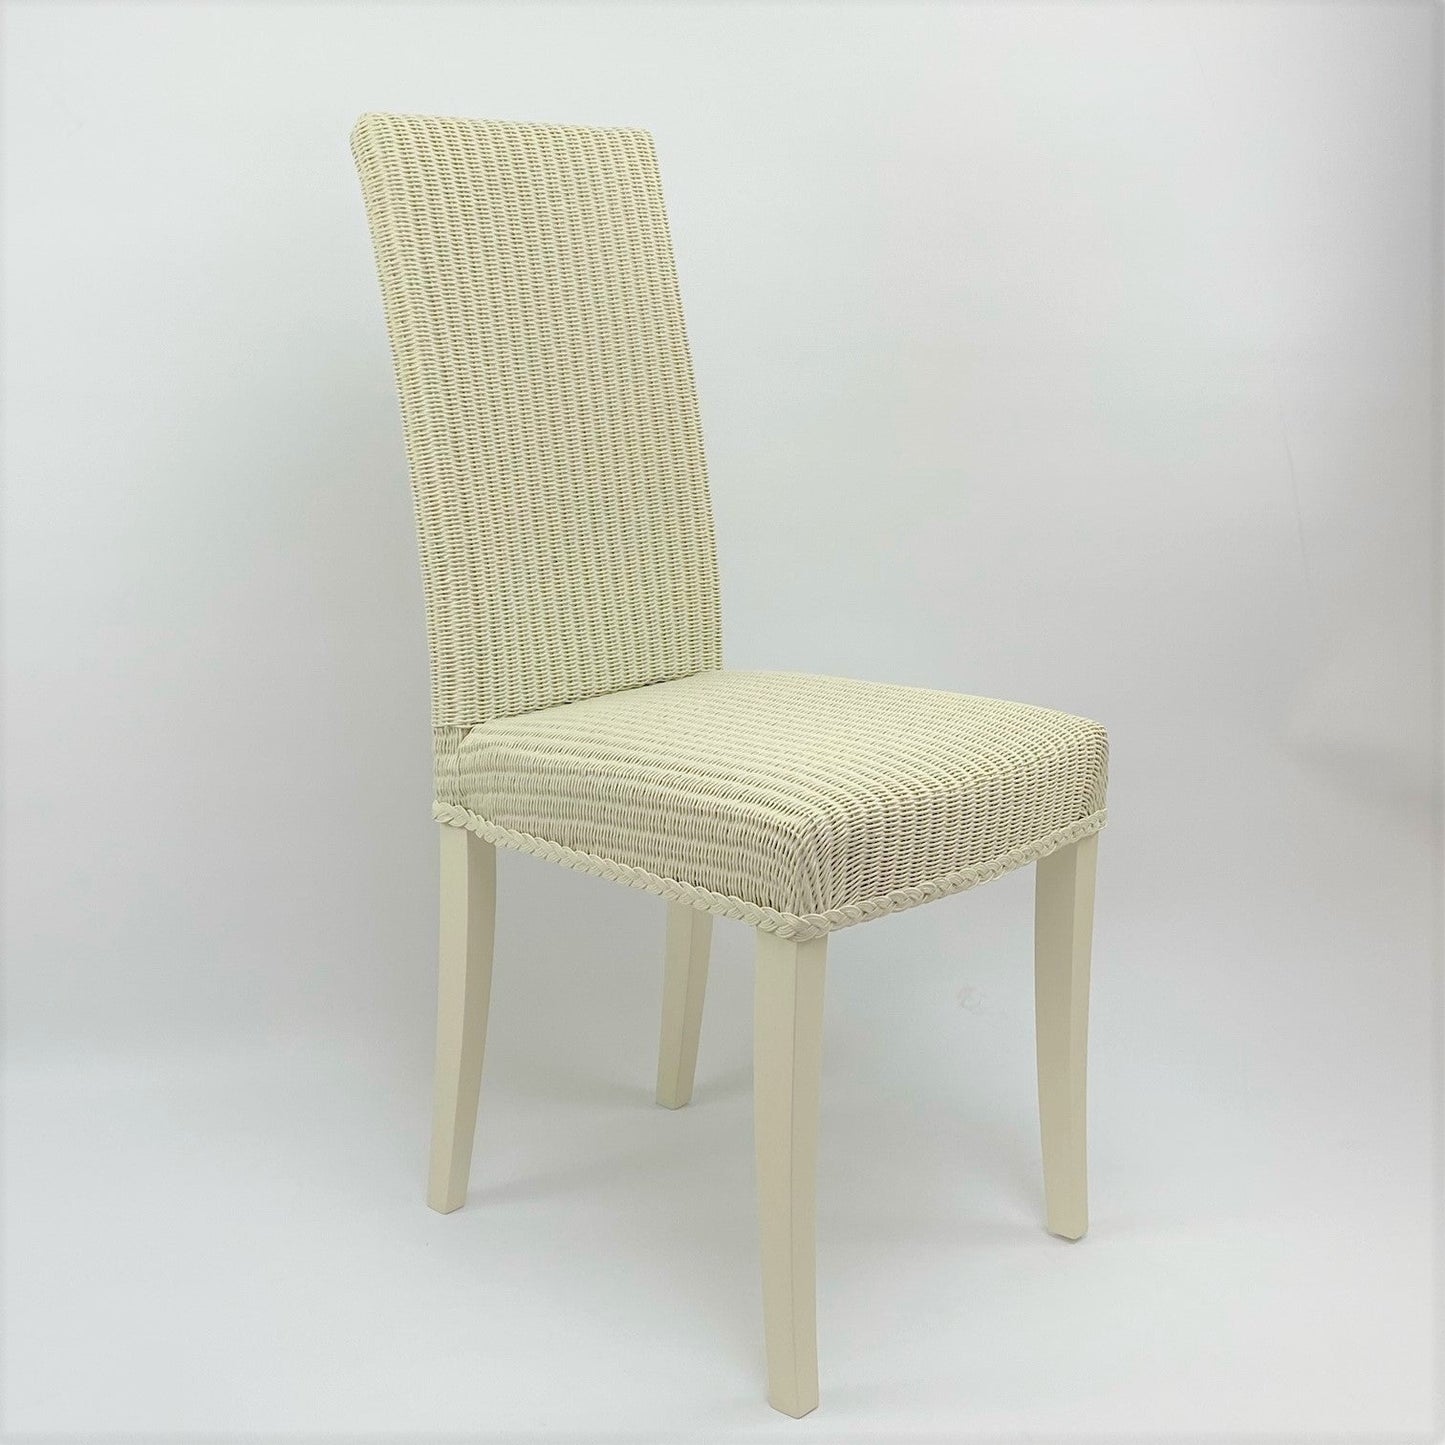 Special Offer Discount - Maybourne Lloyd Loom Dining Chair - set of 6